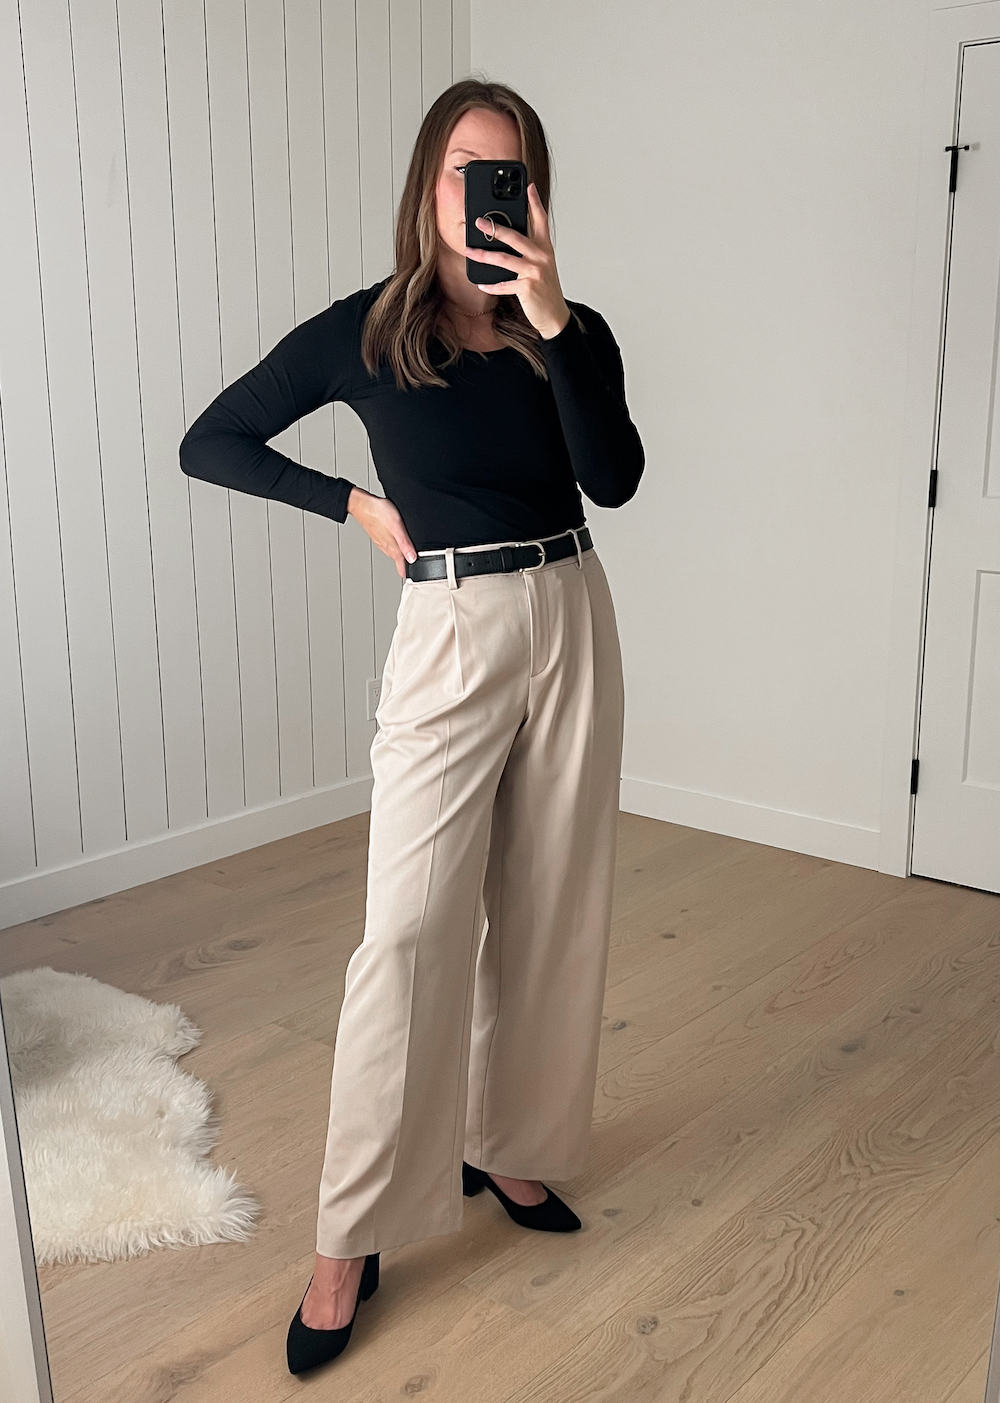 Christal wearing a black long-sleeved top with beige wide-leg pleated pants and black suede pumps